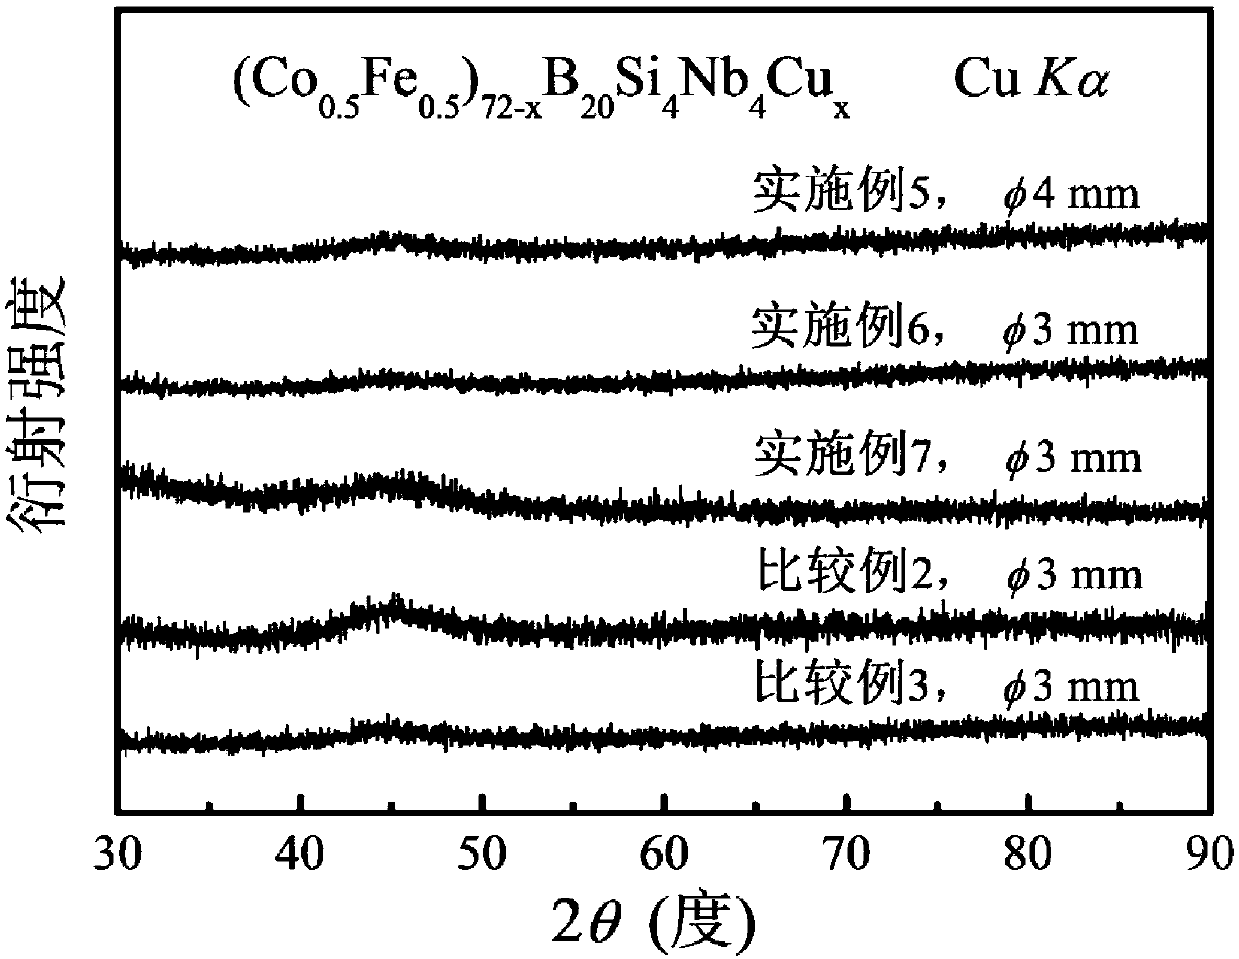 Large-plasticity cobalt-based bulk amorphous alloy with high amorphous forming ability and preparing method large-plasticity cobalt-based bulk amorphous alloy